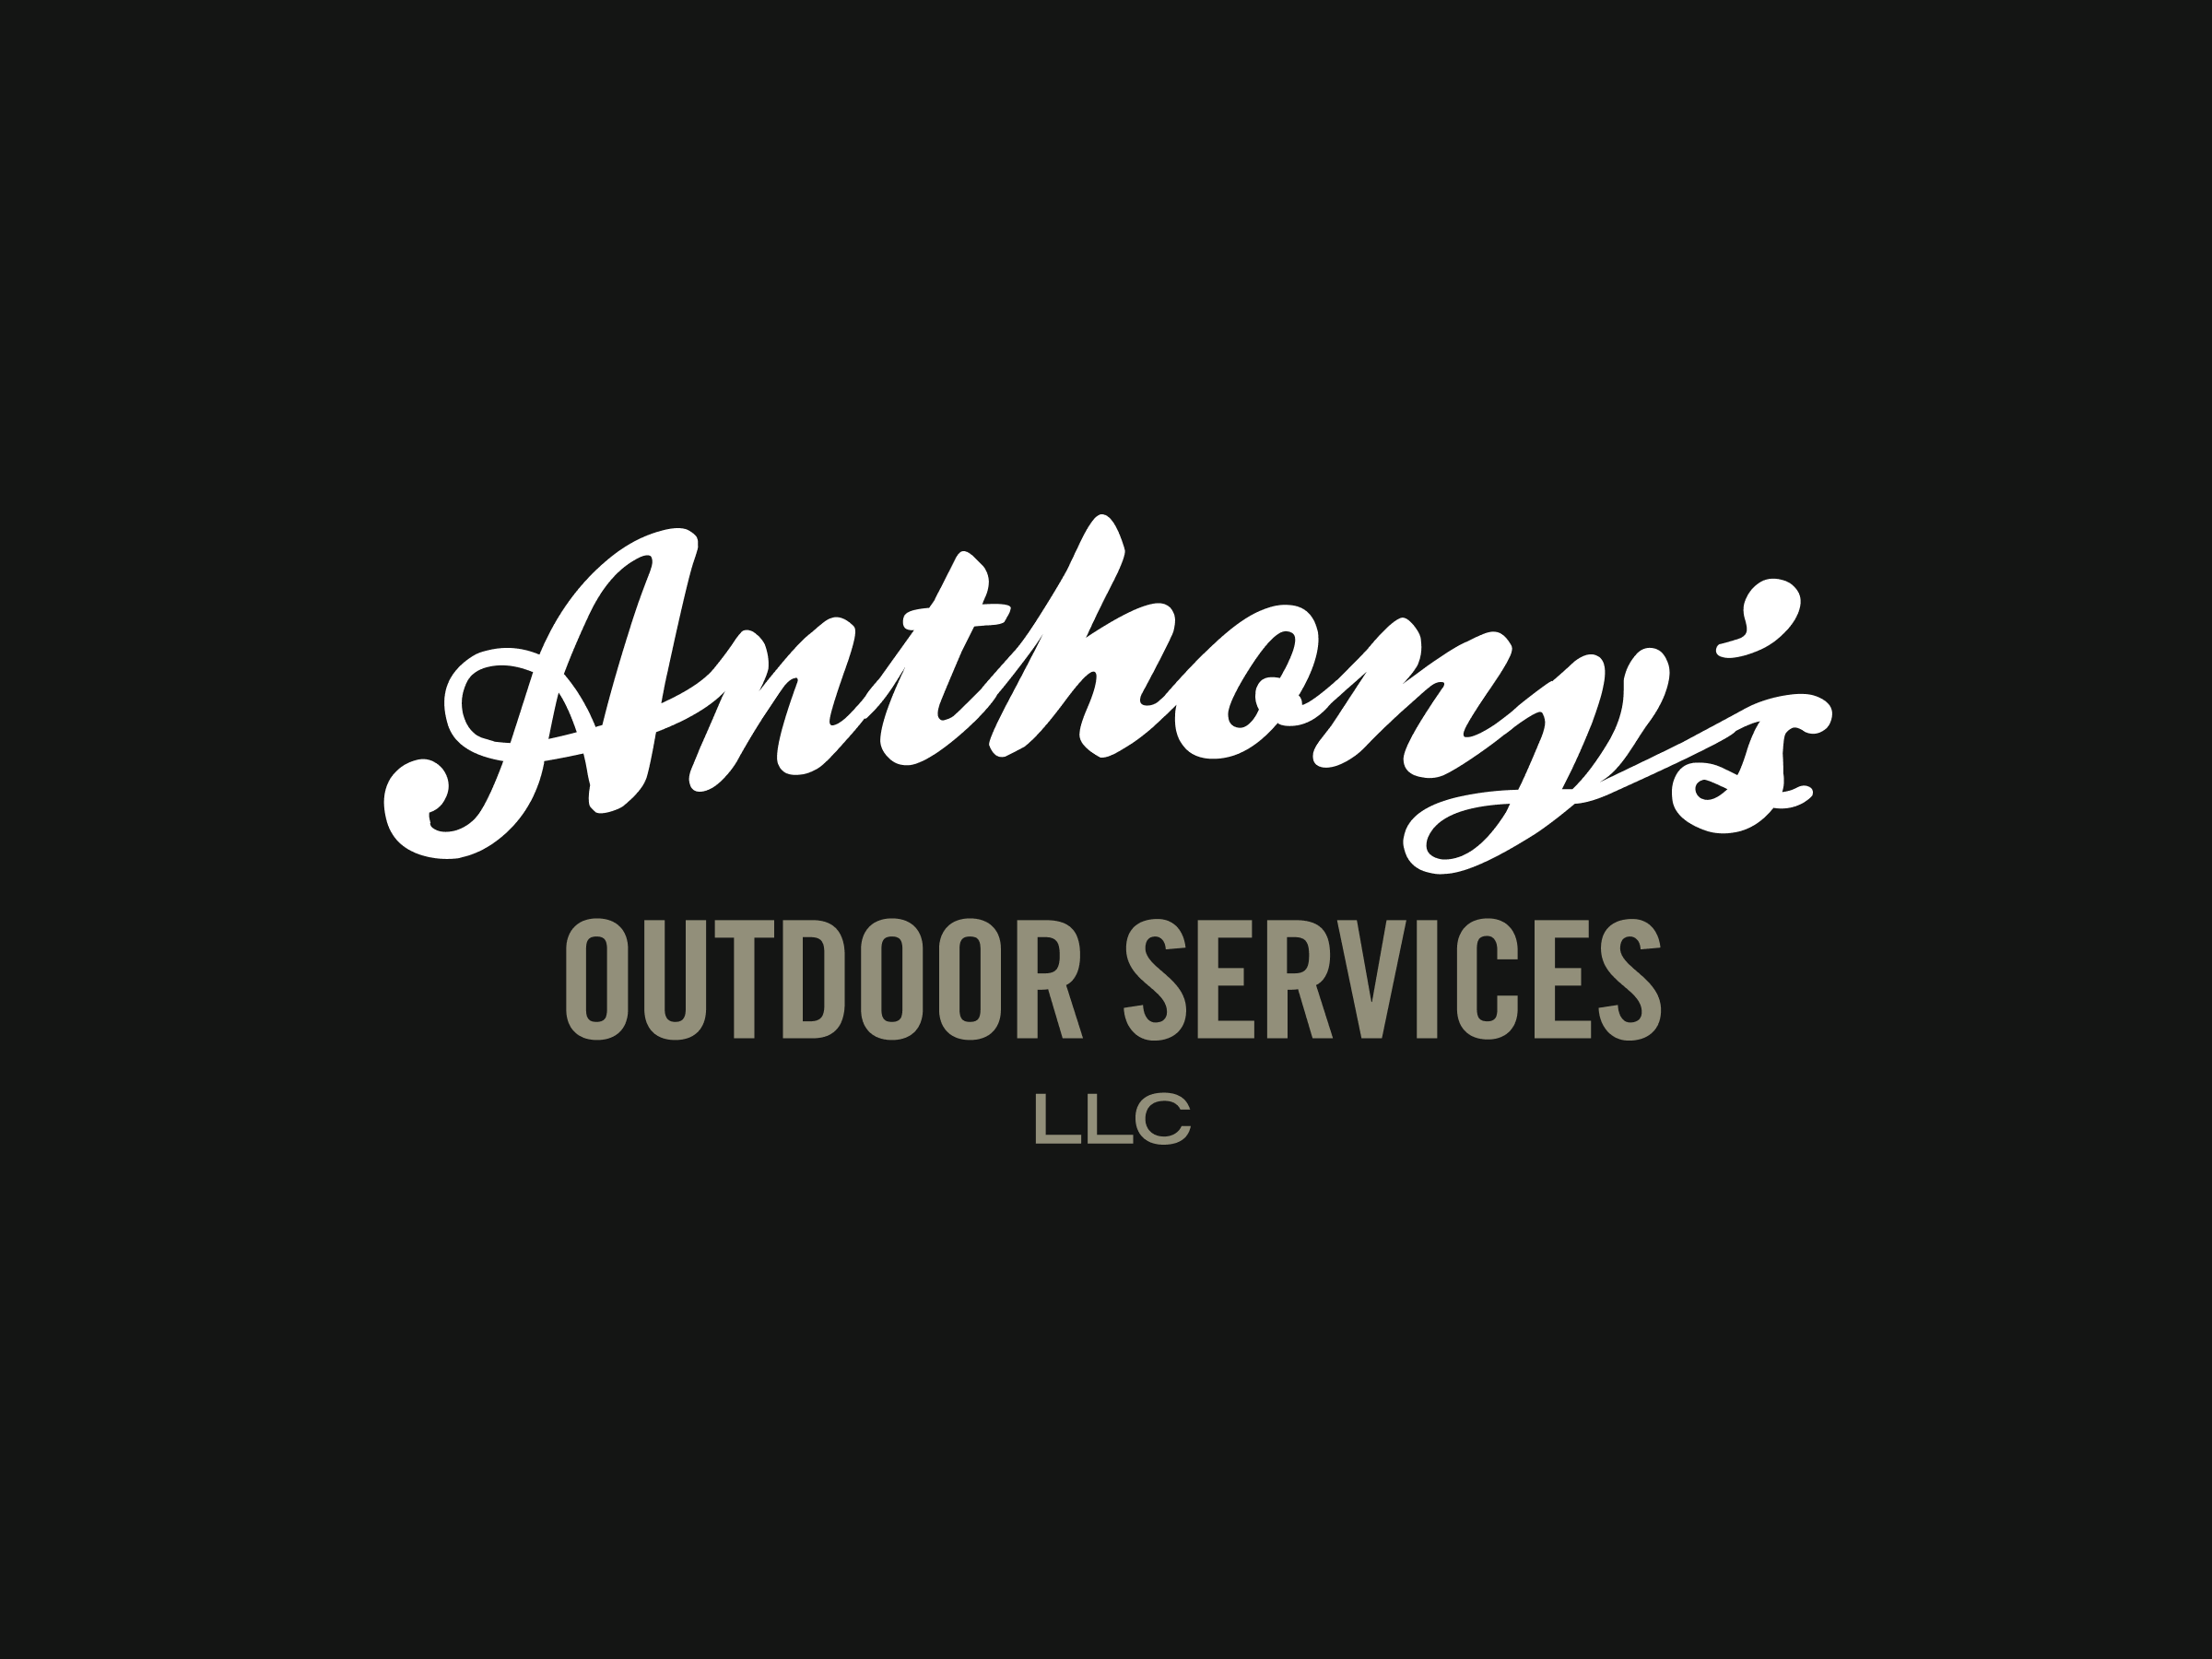 Anthony's Outdoor Services, LLC